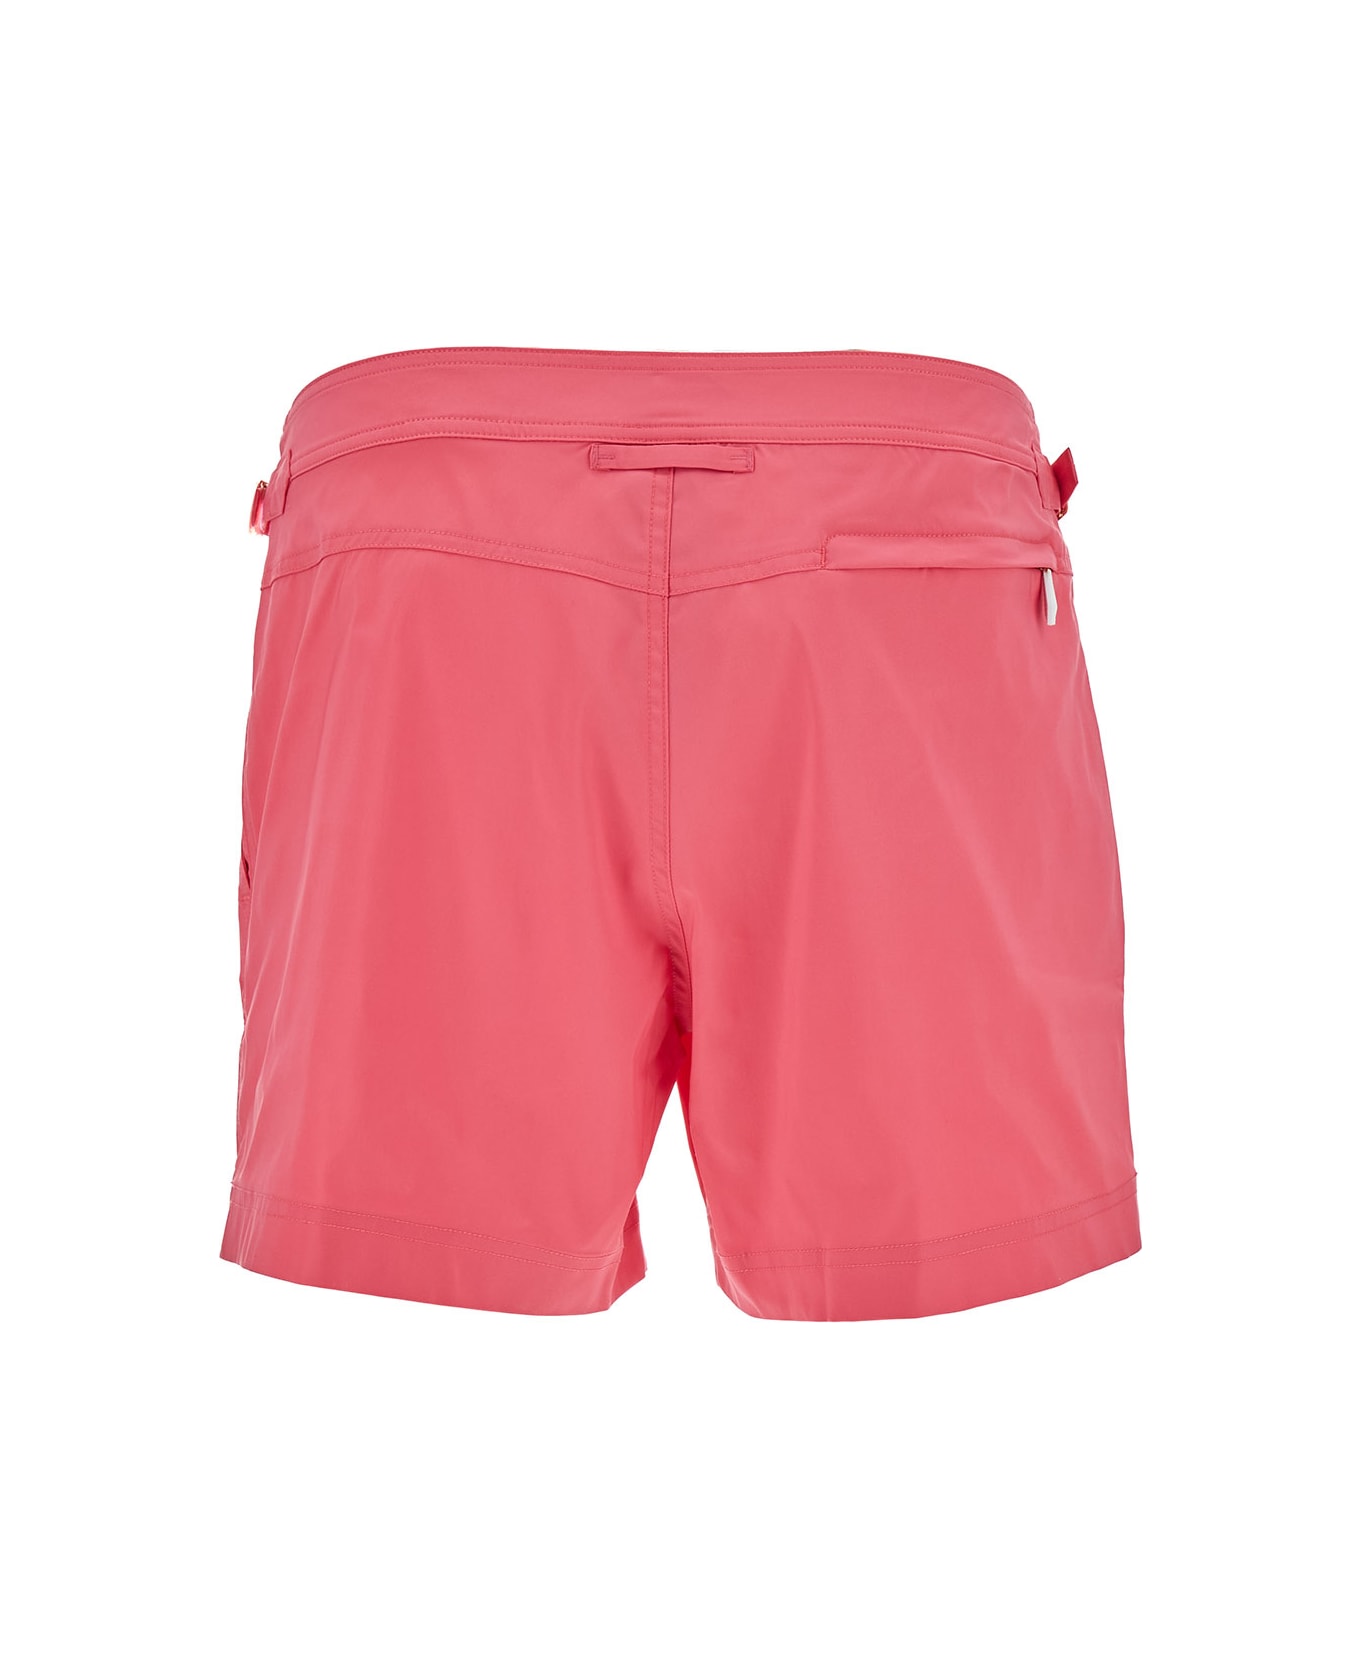 Tom Ford Salmon Pink Swim Shorts With Branded Button In Nylon Man - Fuxia 水着